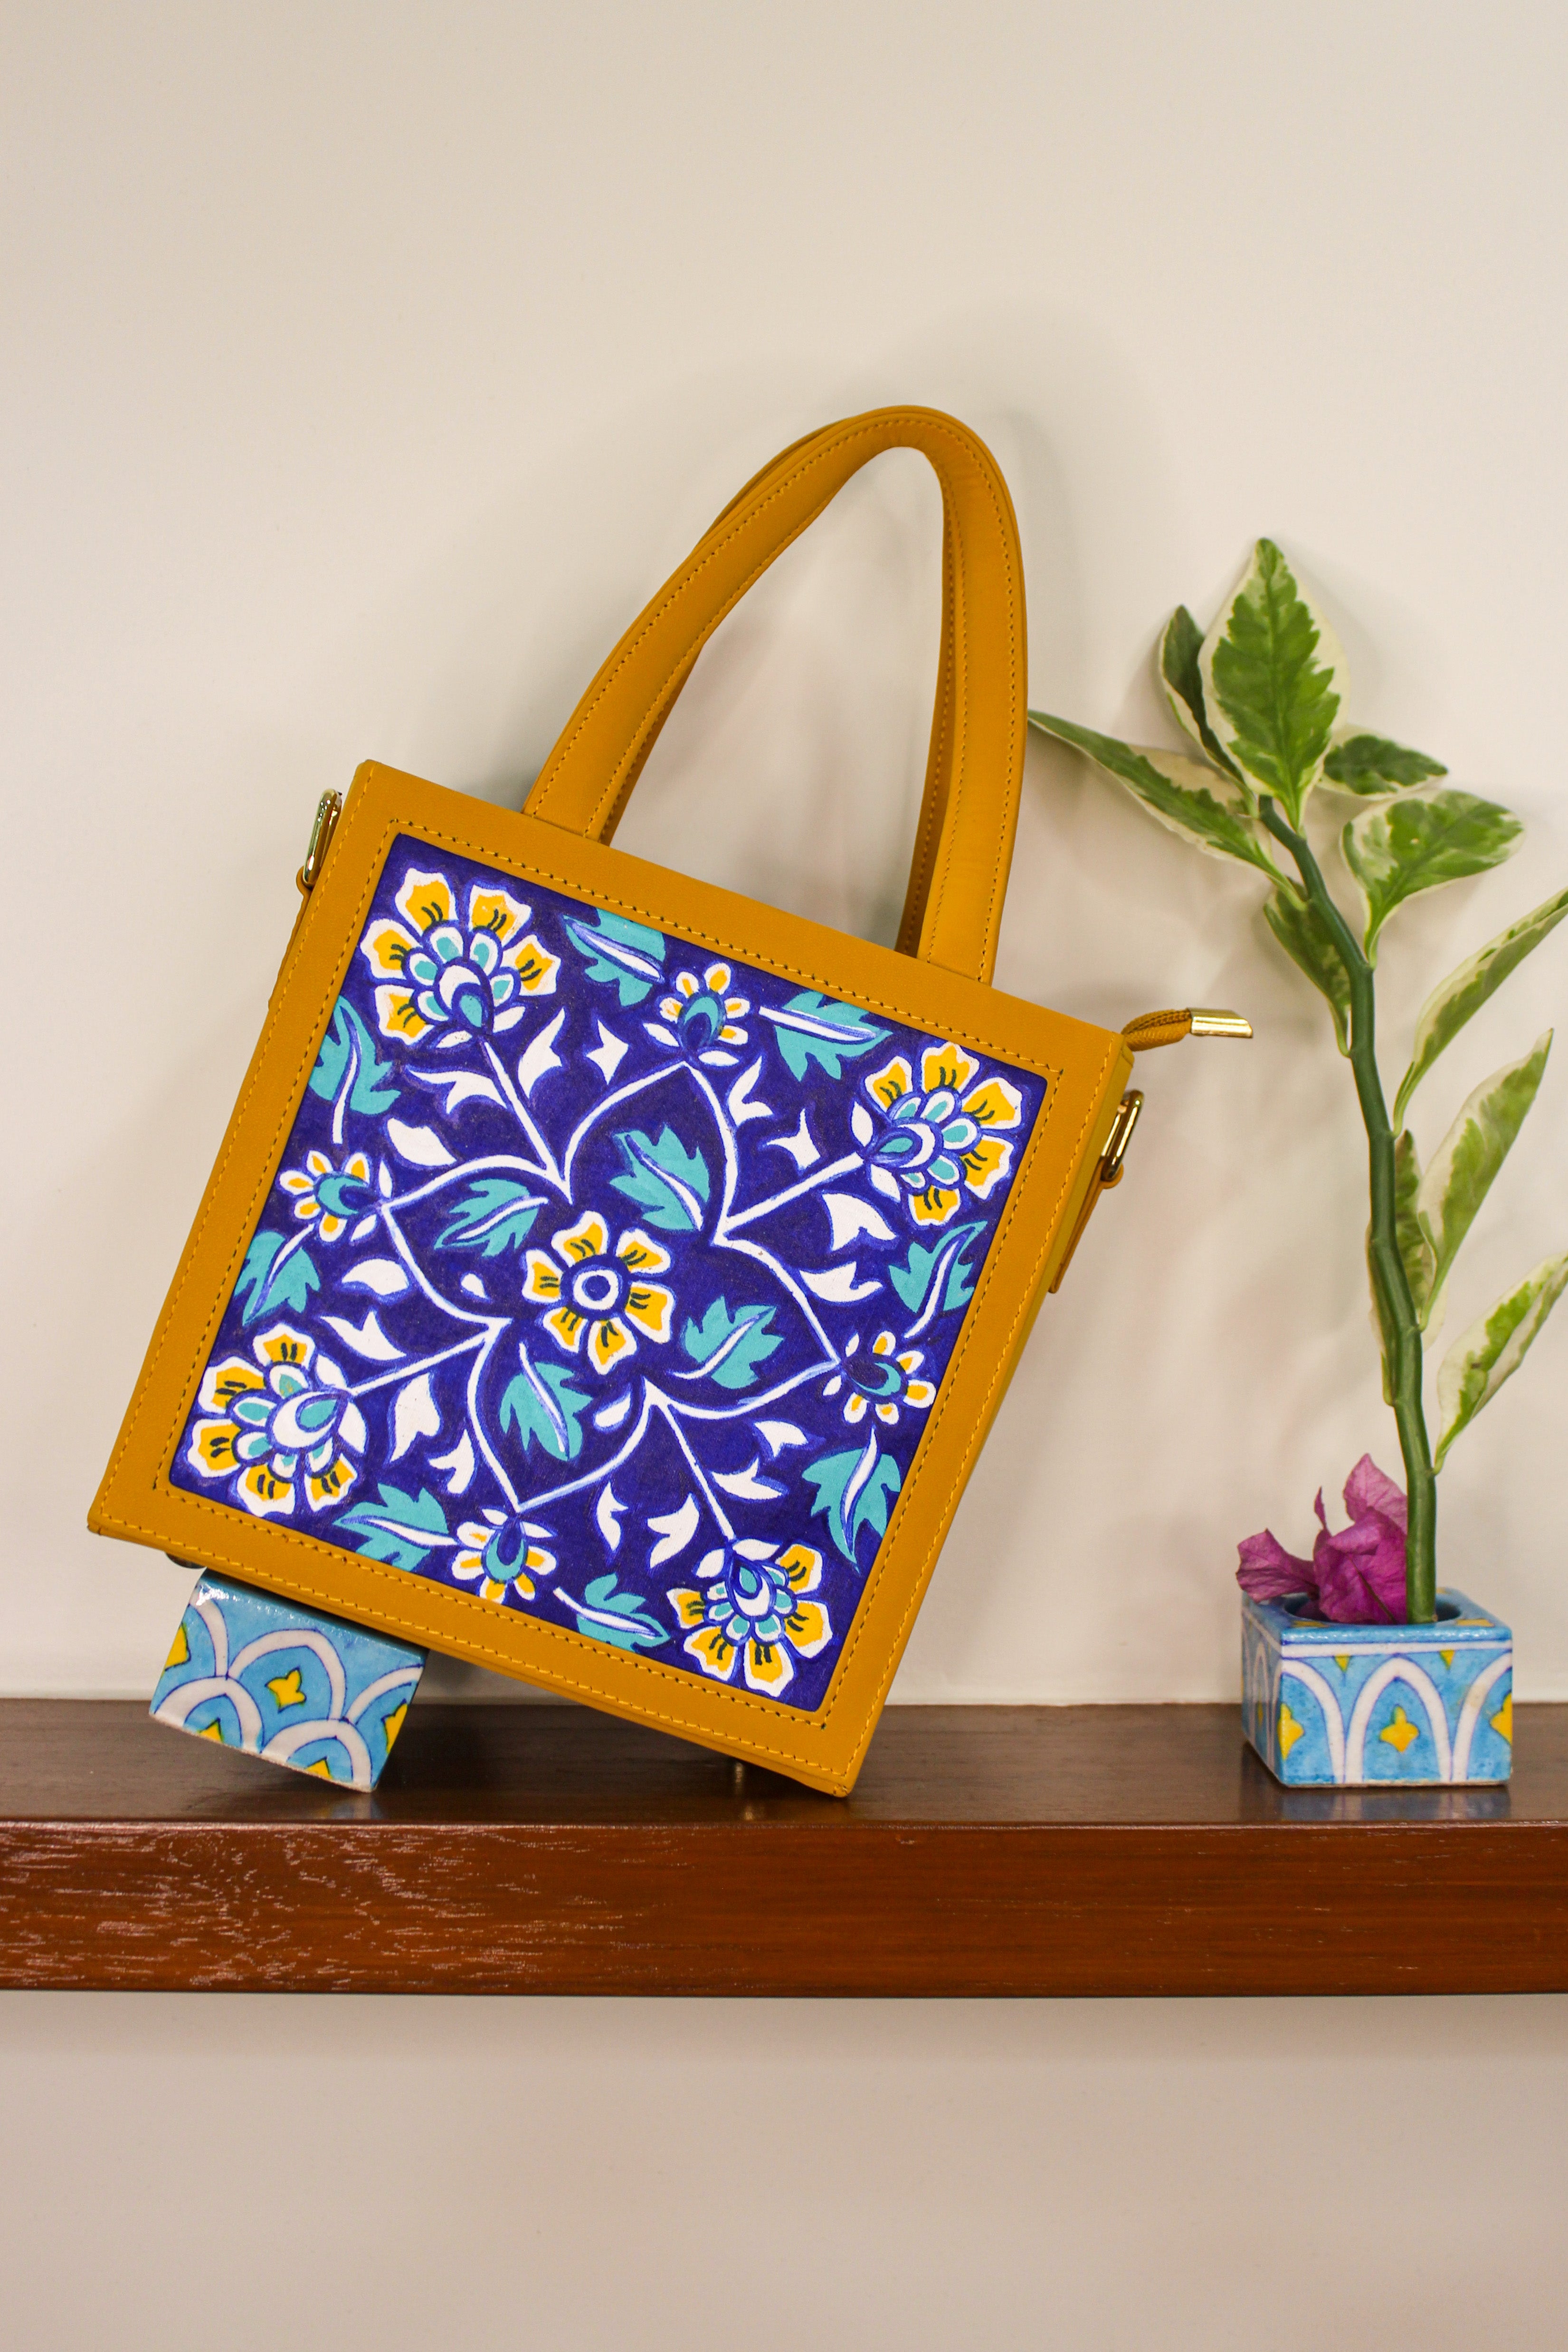 Off the Wall  Hand painted bags handbags, Handpainted bags